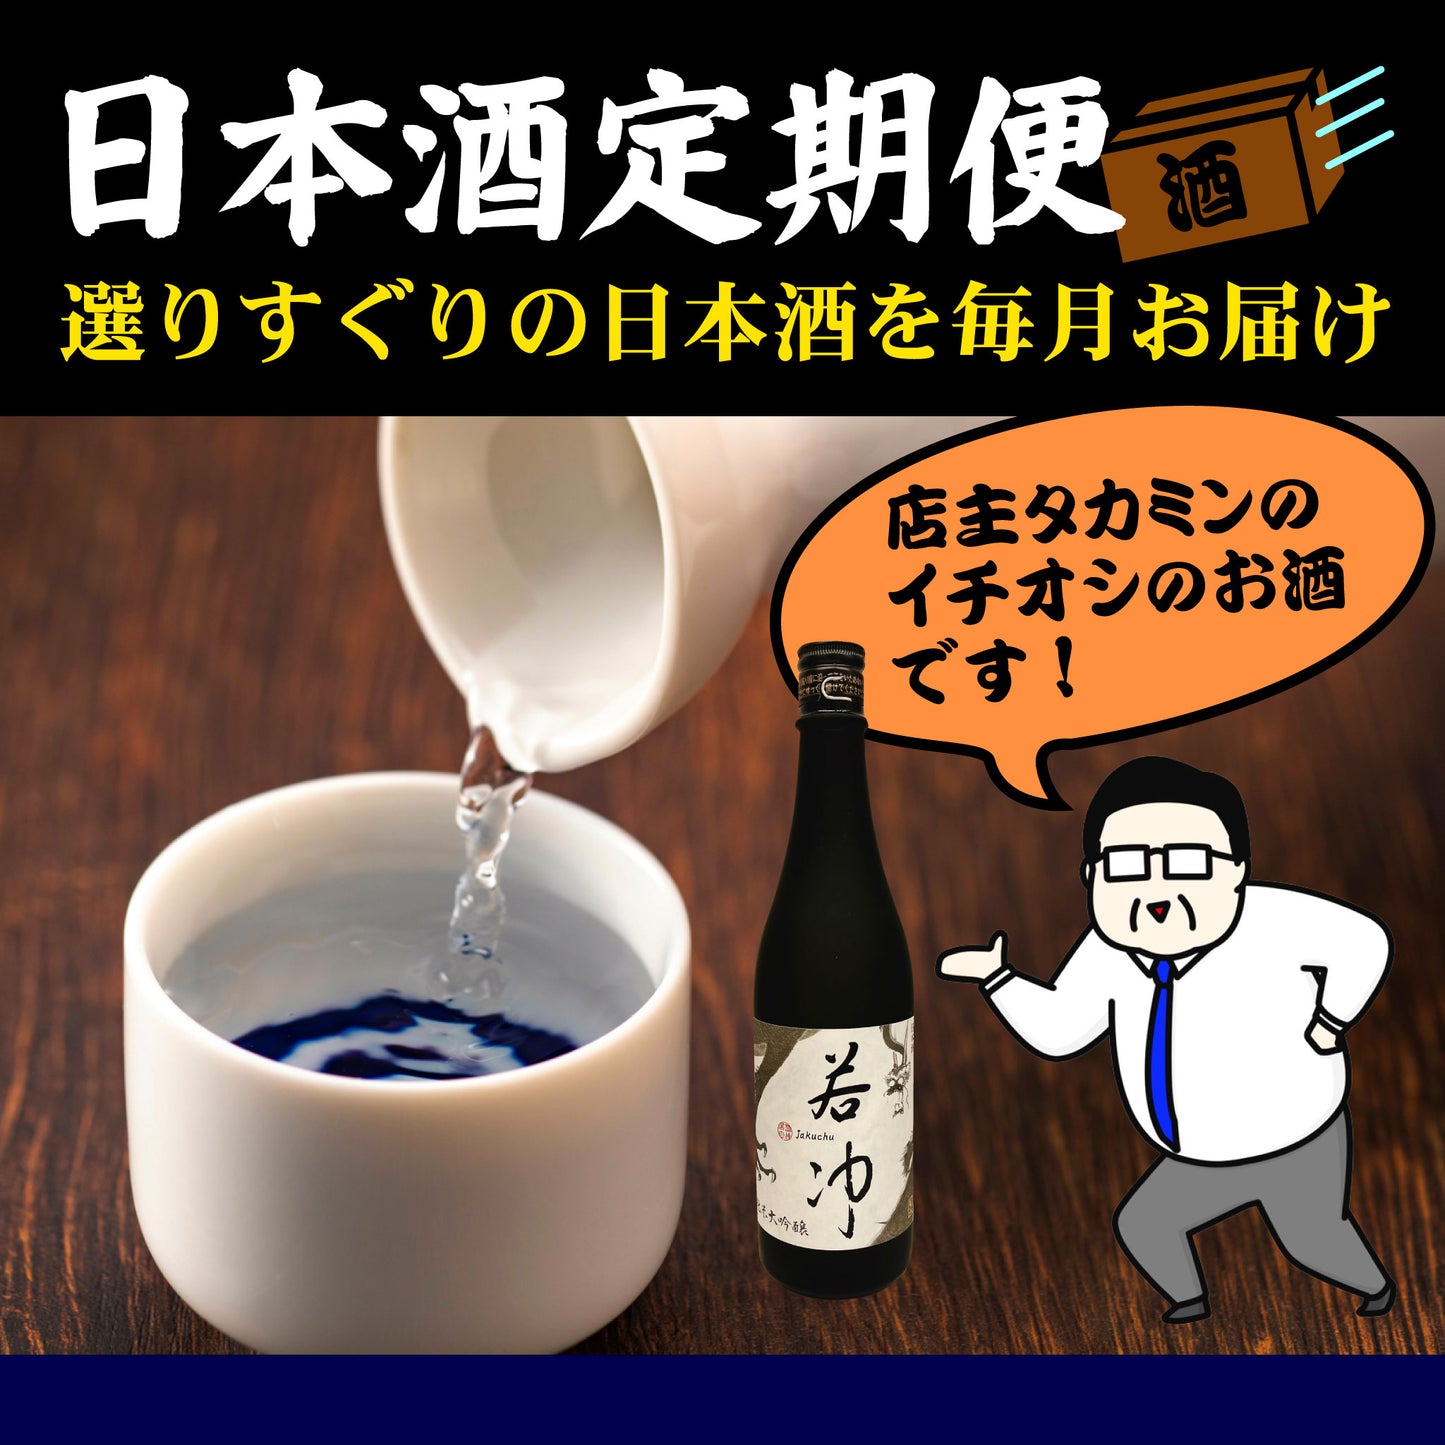 <Regular flights for home> We will deliver Takamin's recommended sake to your home every month! [1 year premium course]